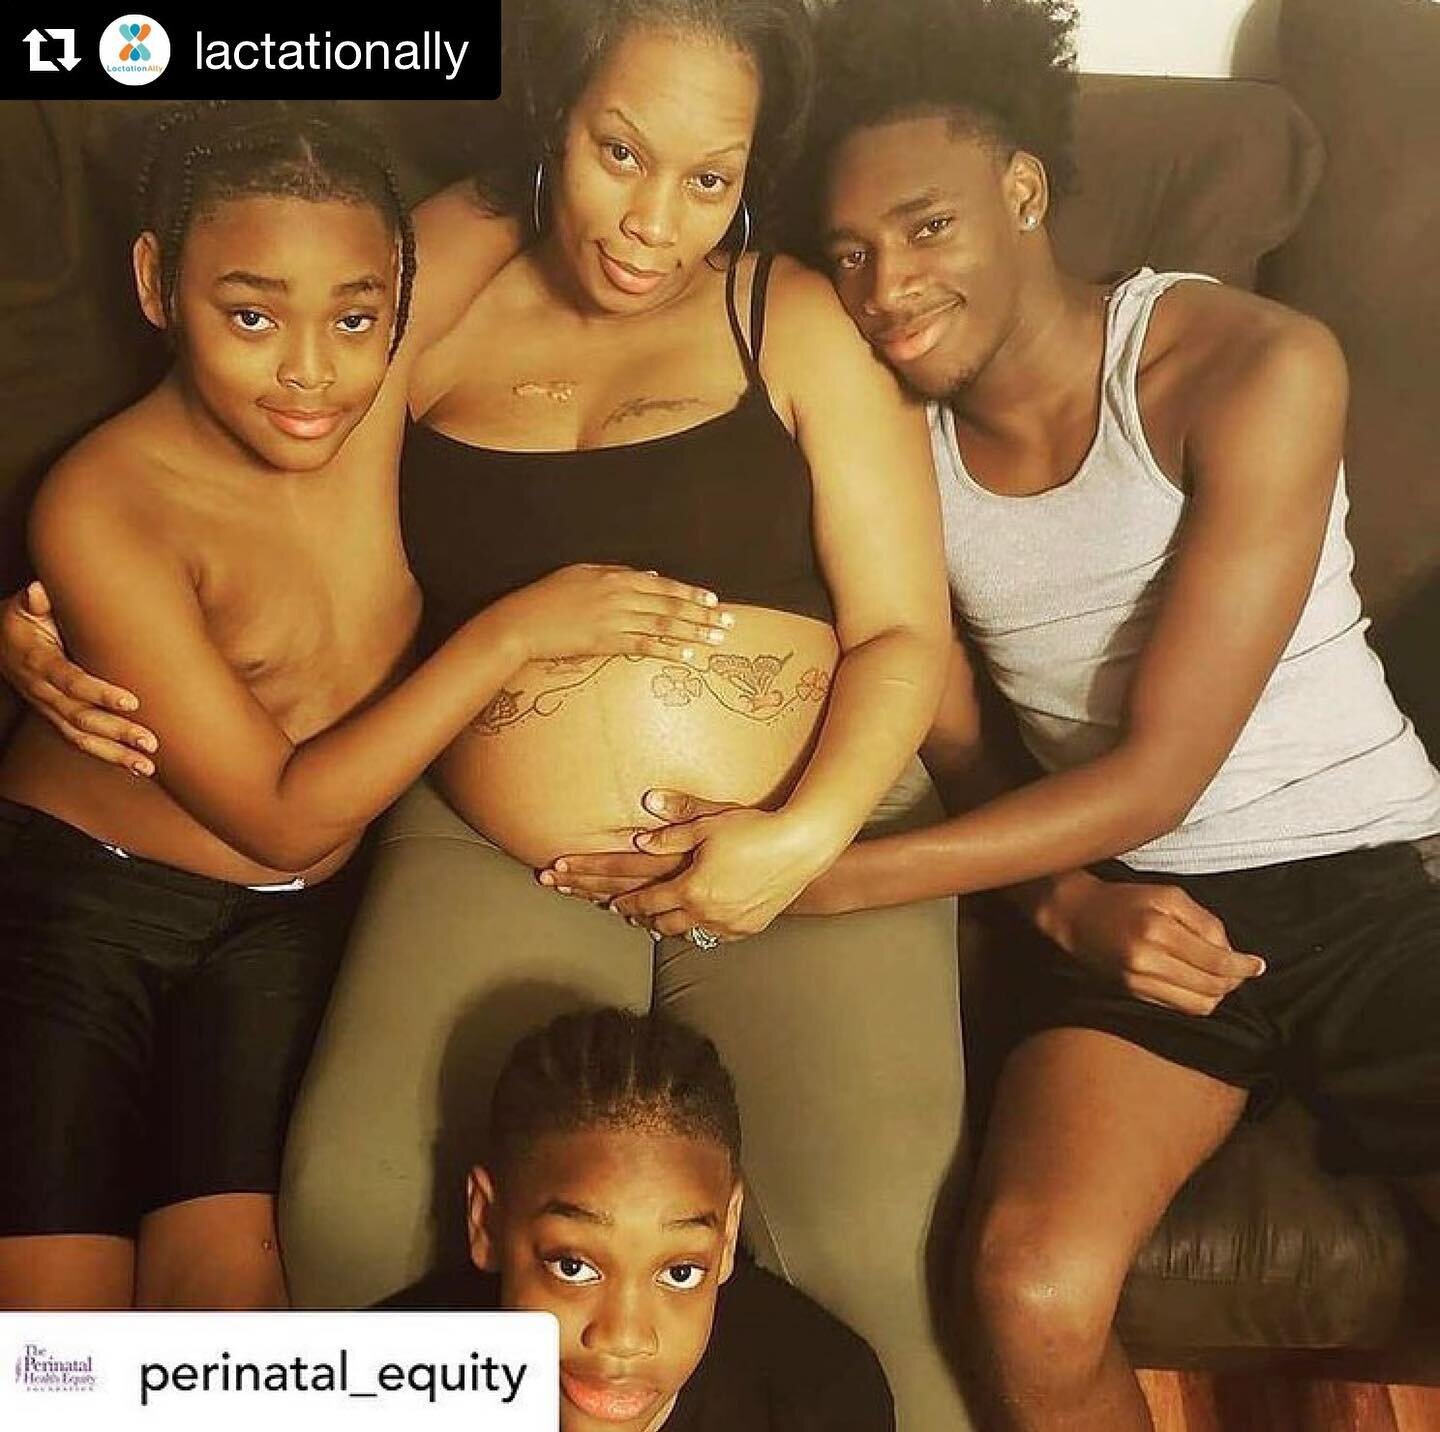 #Repost @lactationally with @get_repost
・・・
📢 CALL TO ACTION!  LIKE, REPOST, DONATE! HELP US REACH OUR goal of 25K to support this grieving family of 4. Repost and link in bio of @perinatal_equity. 
*
*
*
It is with incredible sadness that I report 